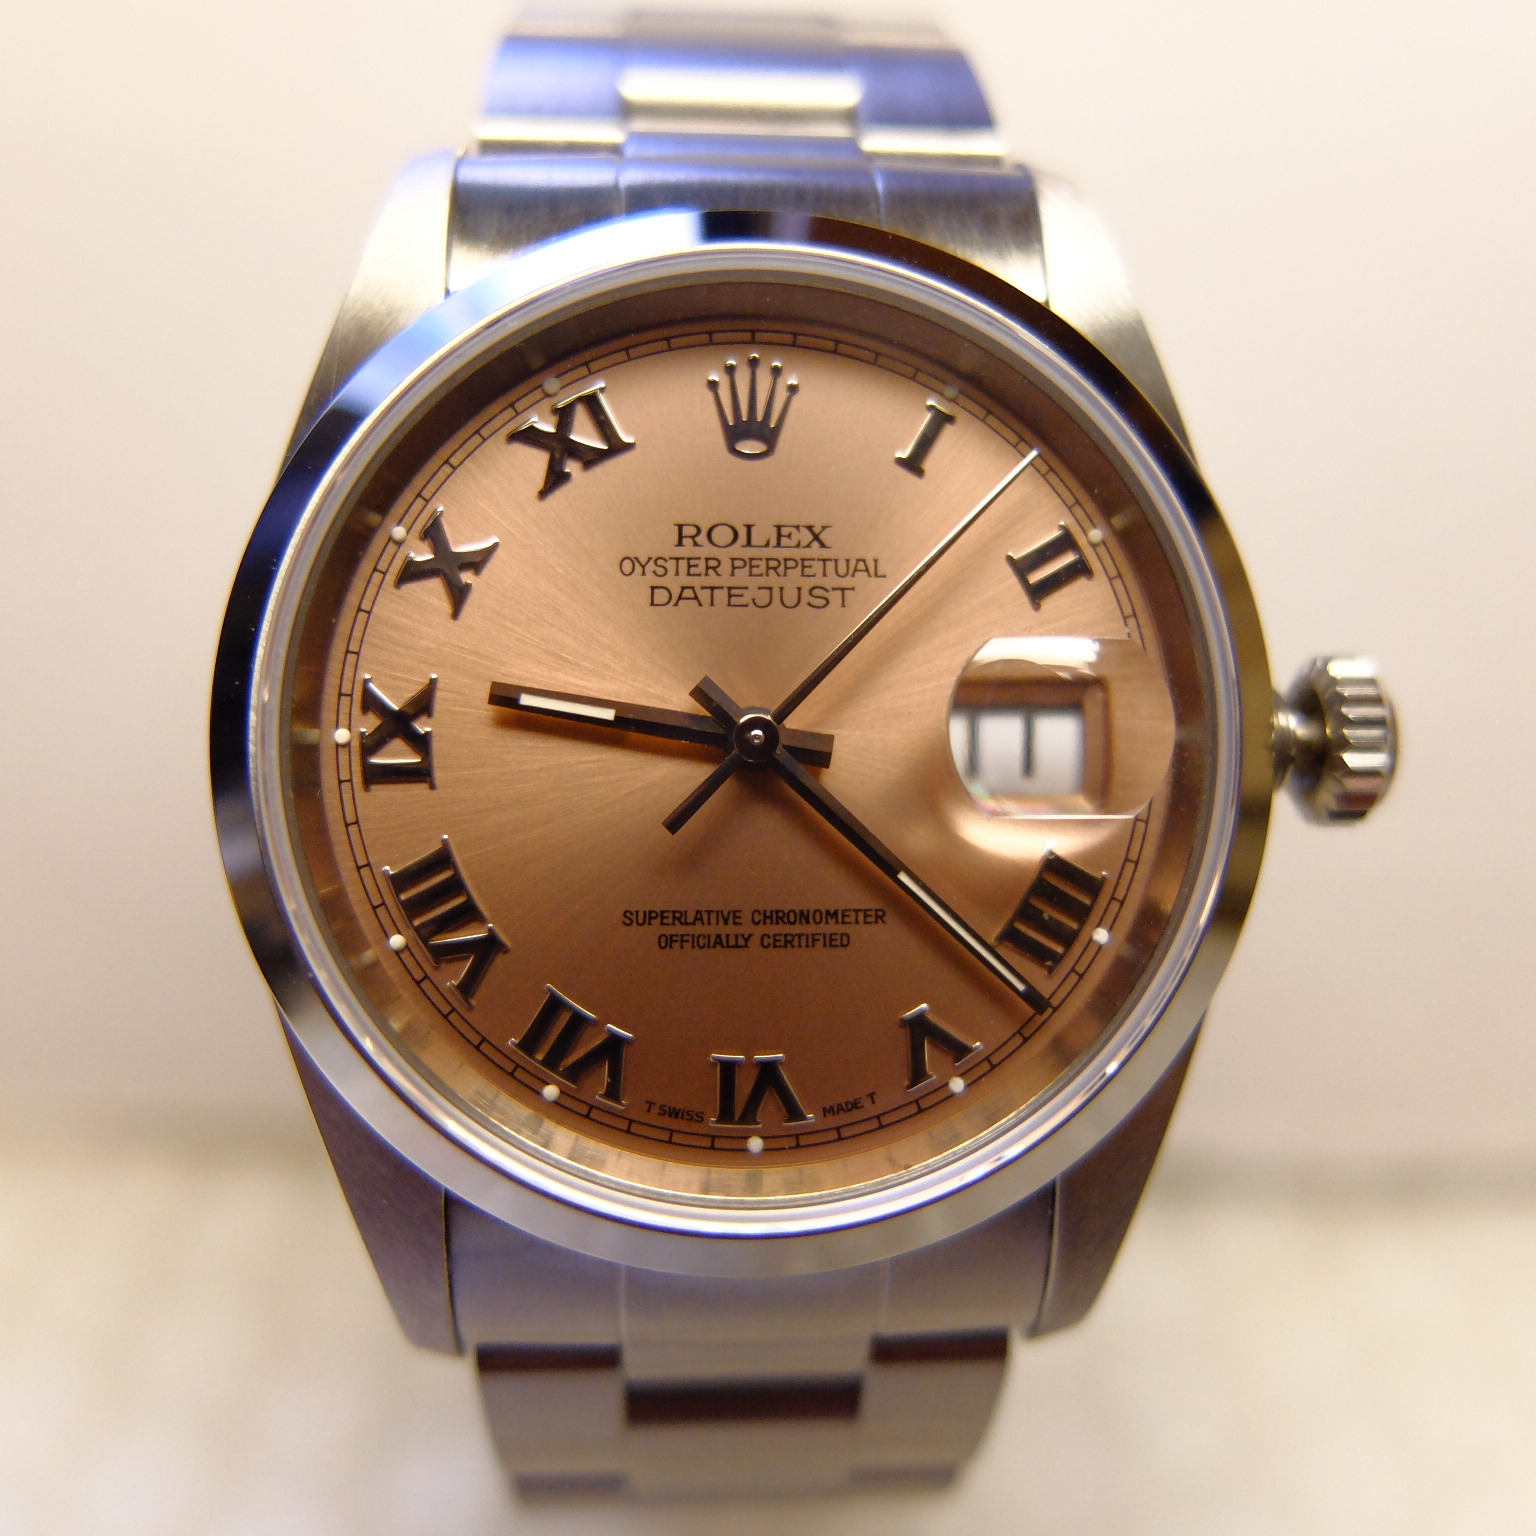 ROLEX oyster perpetual datejust 16200 